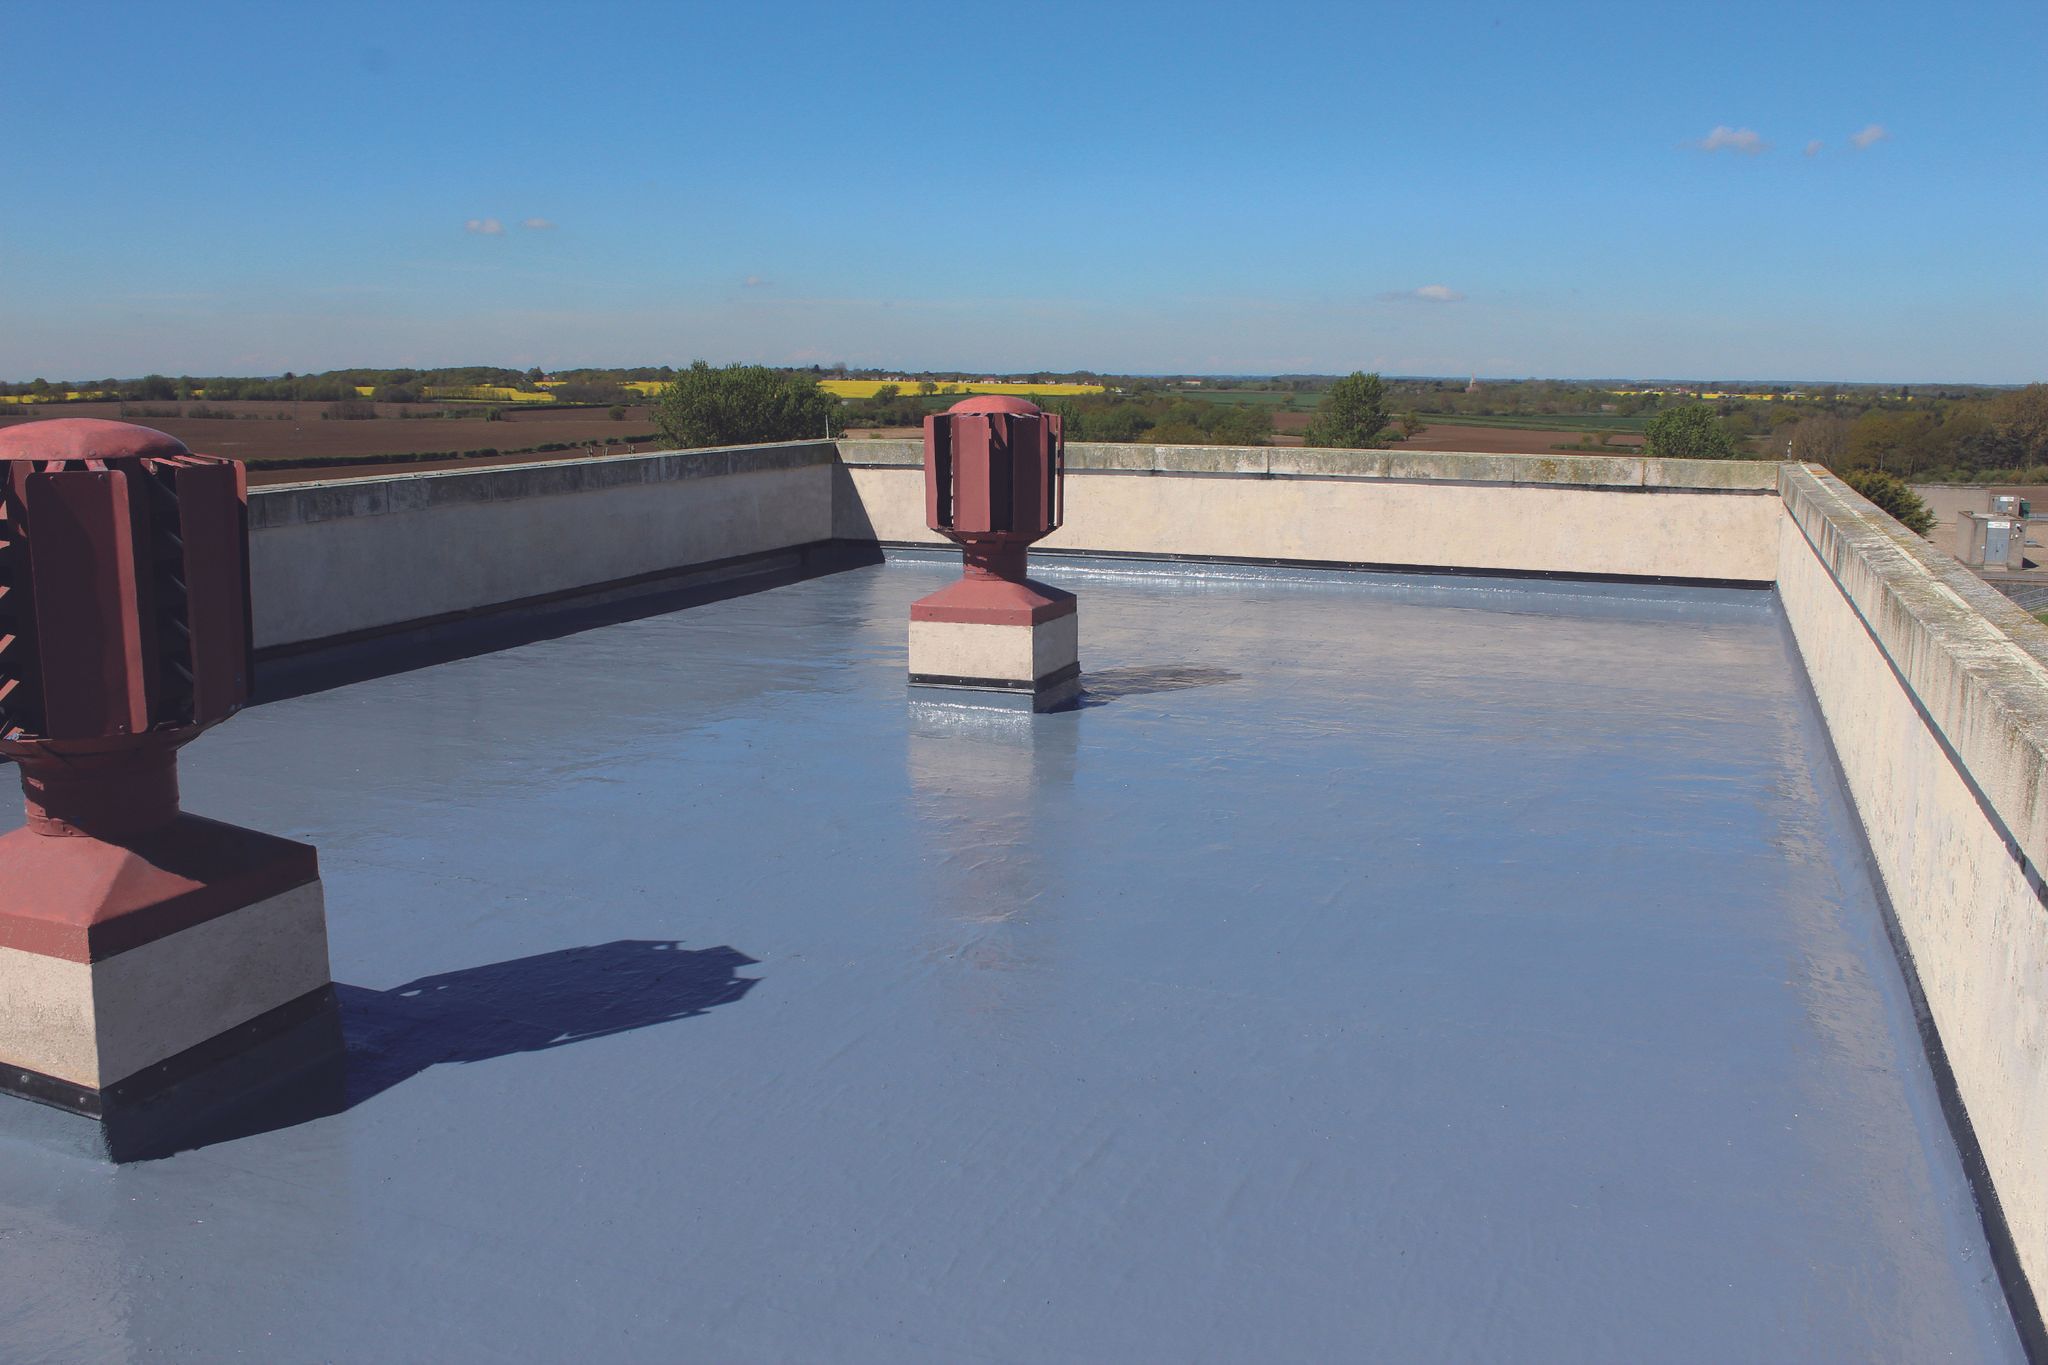 Tuff Waterproofing launches polyurethane-based roofing system for commercial market